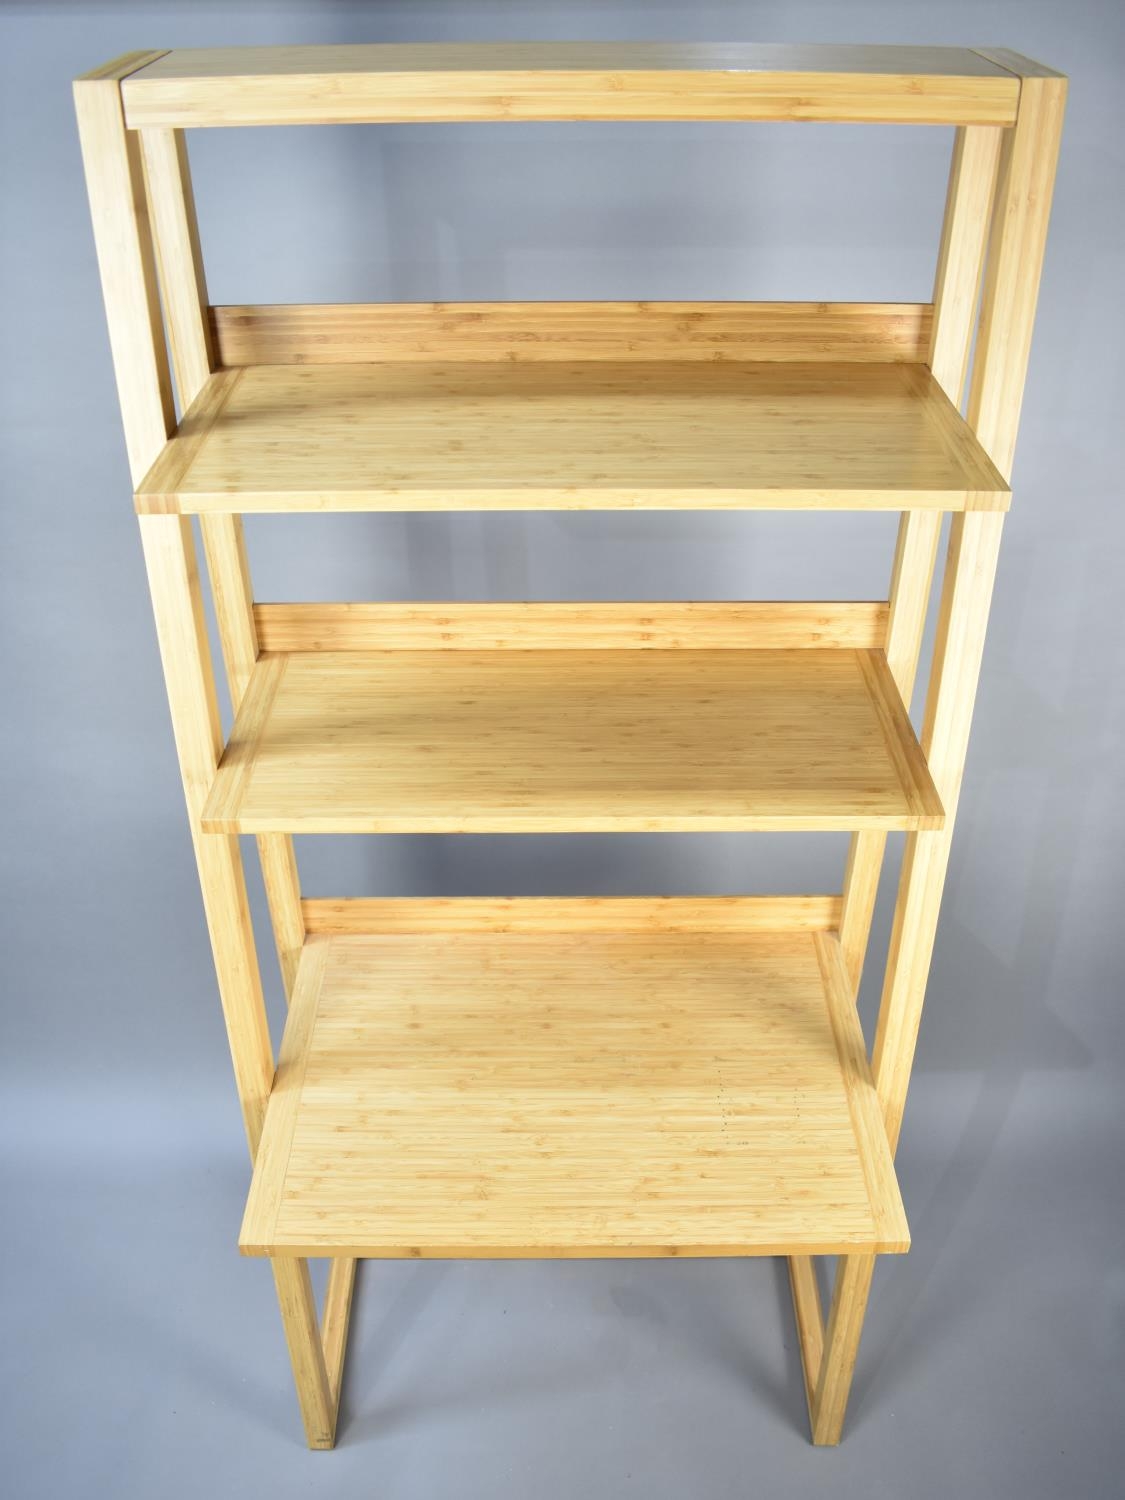 A Modern Three Shelf Waterfall Stand or Desk, 80cms Wide and 182cms High - Image 2 of 2